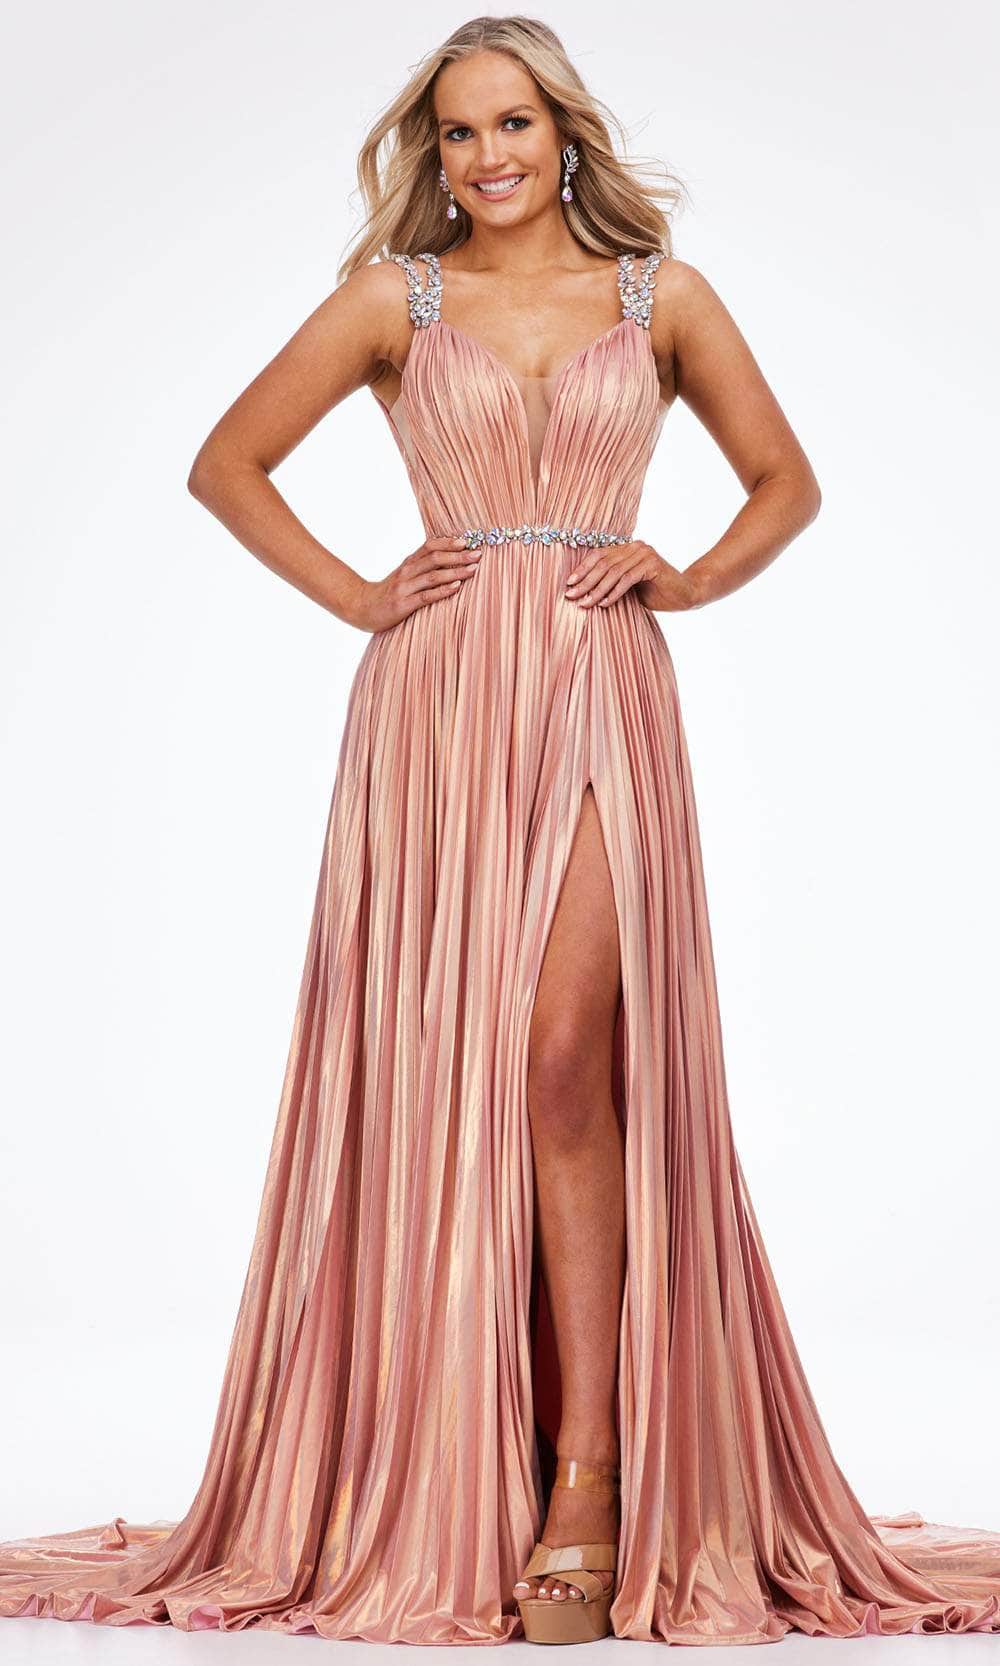 Ashley Lauren 11147 - Accordion Pleated Long Dress Special Occasion Dress 0 / Pink